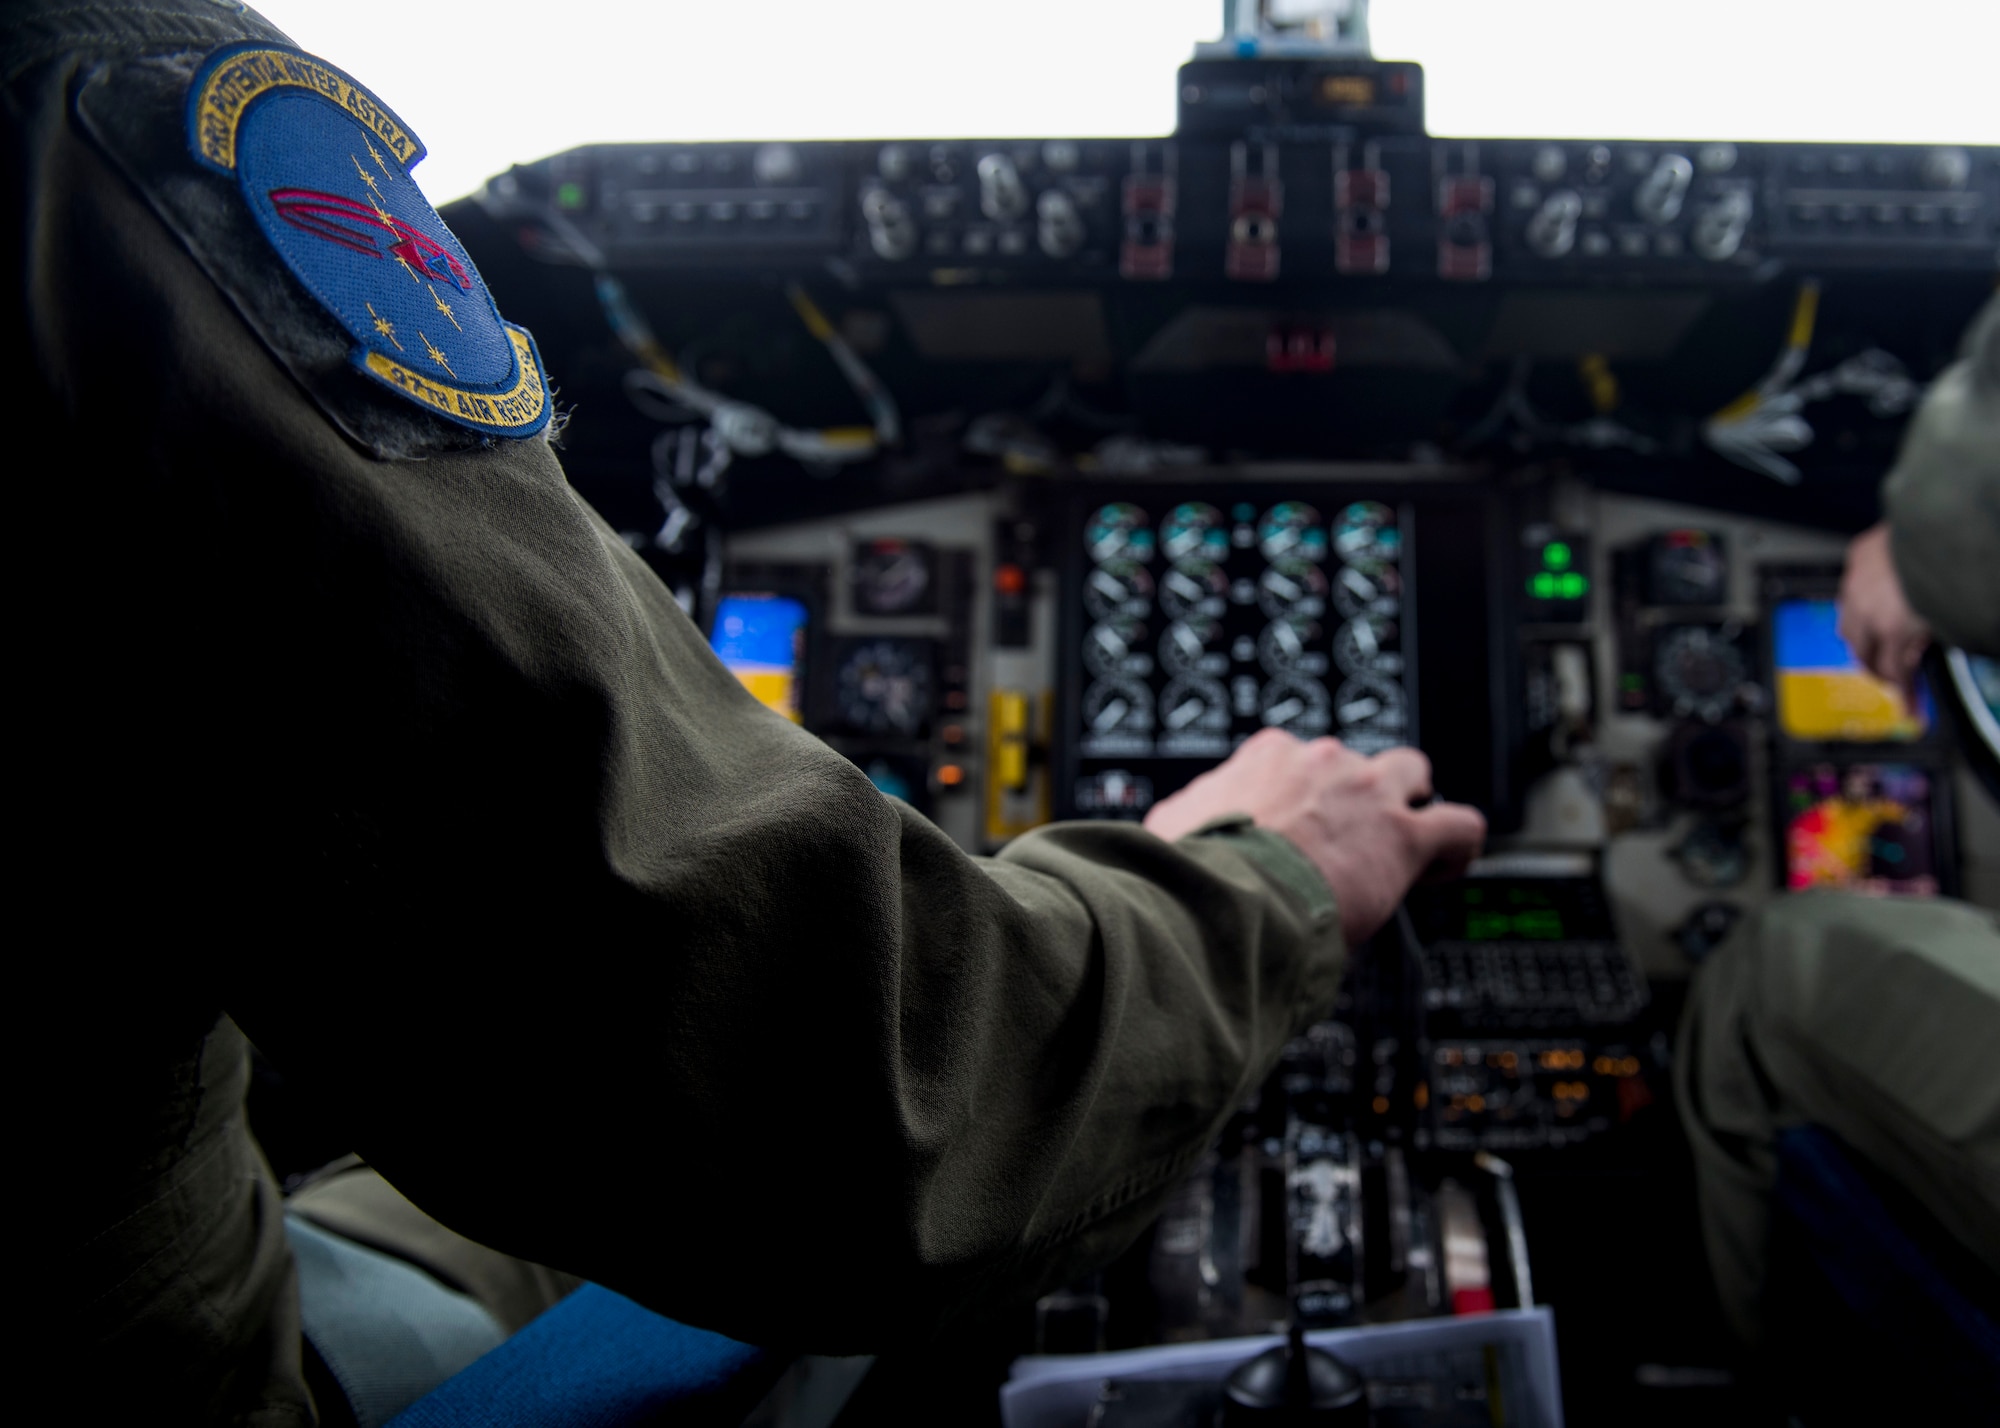 U.S. Air Force Capt. Steve Suhrie, 97th Air Refueling Squadron pilot, initiates take-off in a KC-135 Stratotanker for the 97th ARS’s first mission at Fairchild Air Force Base, Washington, Jan. 13, 2020. The 97th ARS has over 70 years of history that includes it serving as one of the first Air Force air refueling units in 1949, its deactivation in 2004, and now the successful completion of its first mission since its reactivation in October 2019. (U.S. Air Force photo by Senior Airman Lawrence Sena)